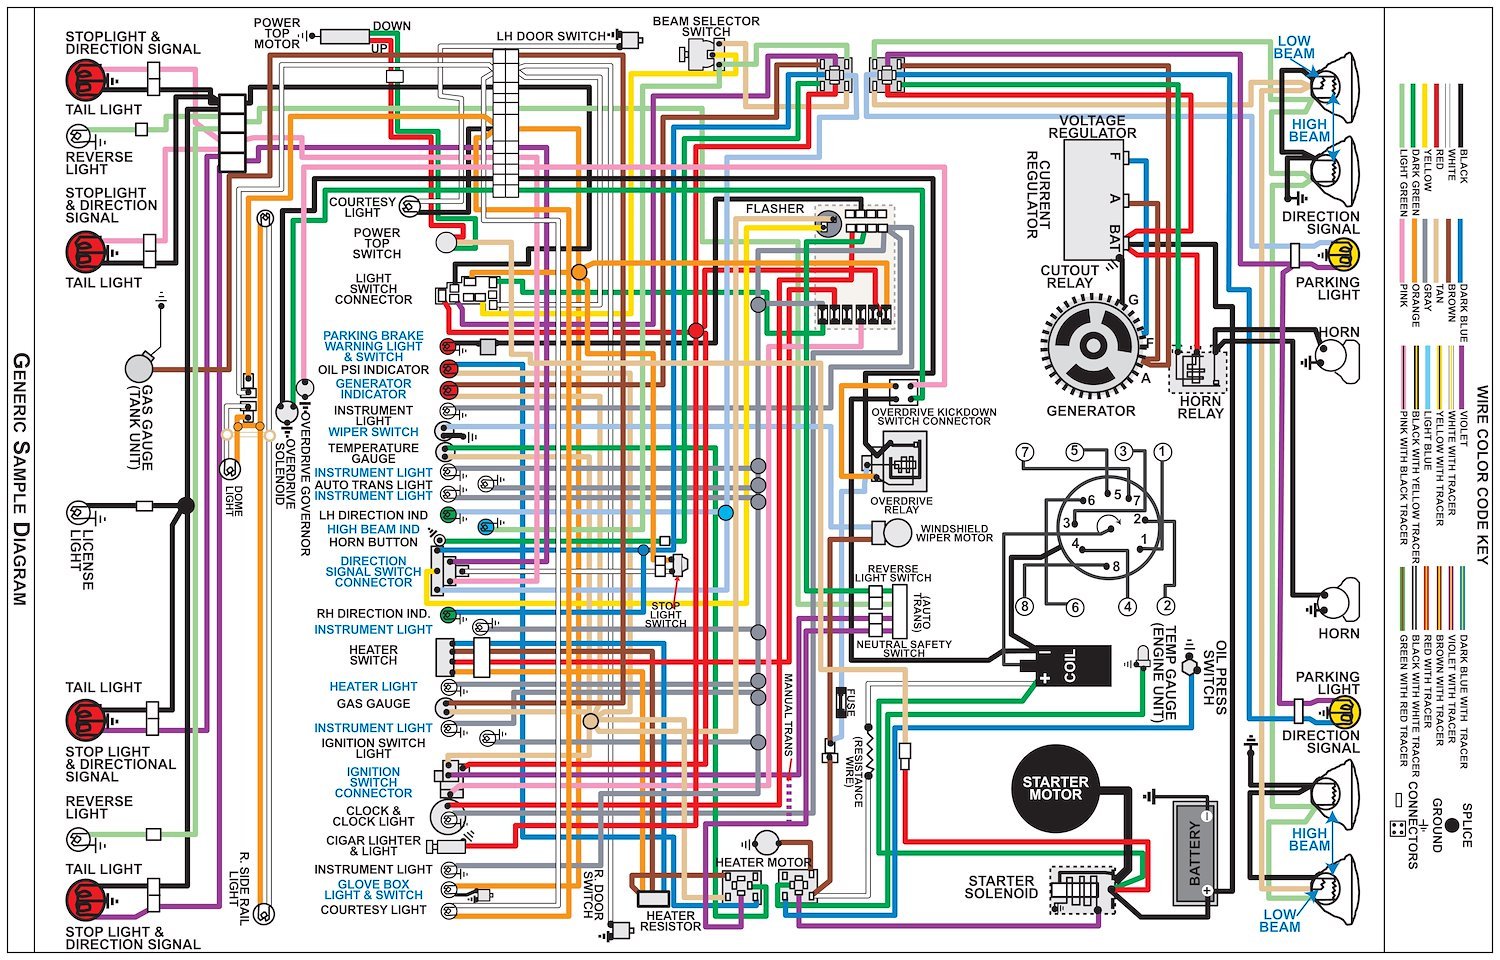 Wiring Diagram for 1970 Plymouth GTX, Road Runner, Superbird with Rallye Dash, 11 in x 17 in., Laminated